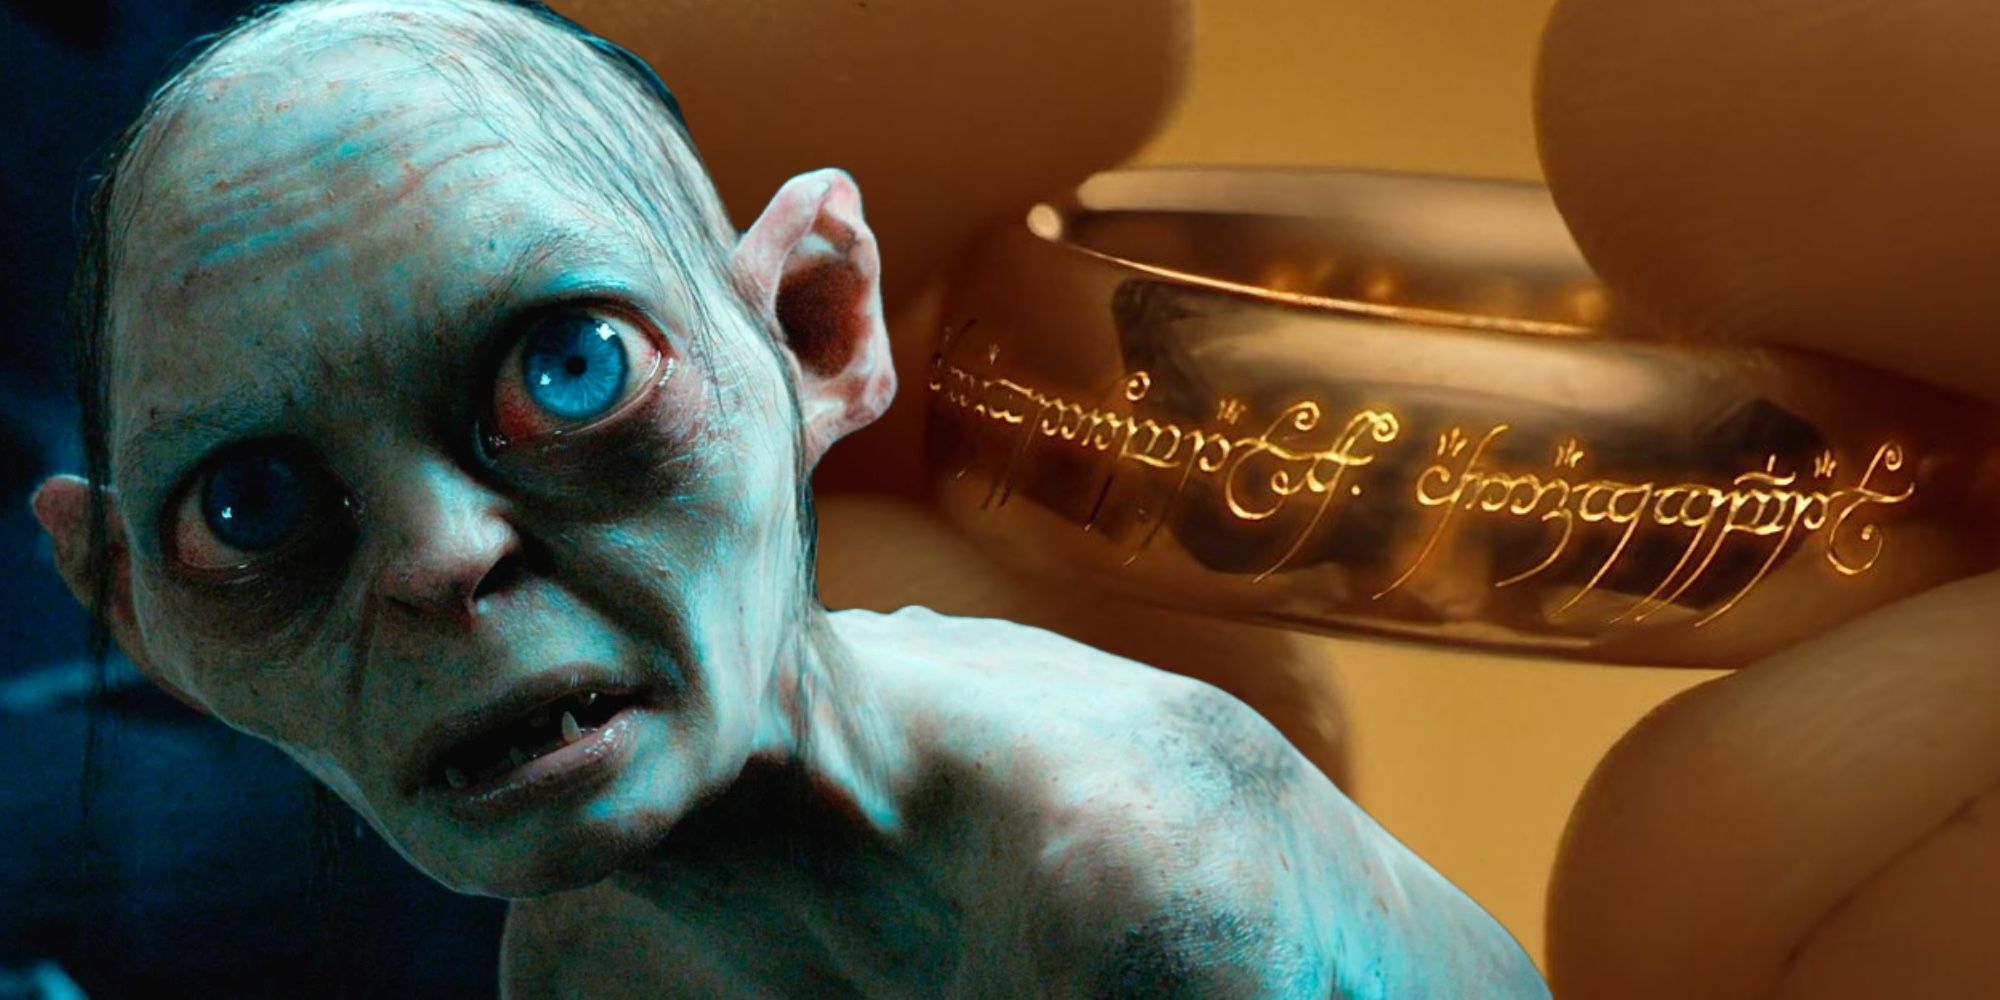 A composite image of Gollum looking sad in front of a closeup of the One Ring from The Lord of the Rings